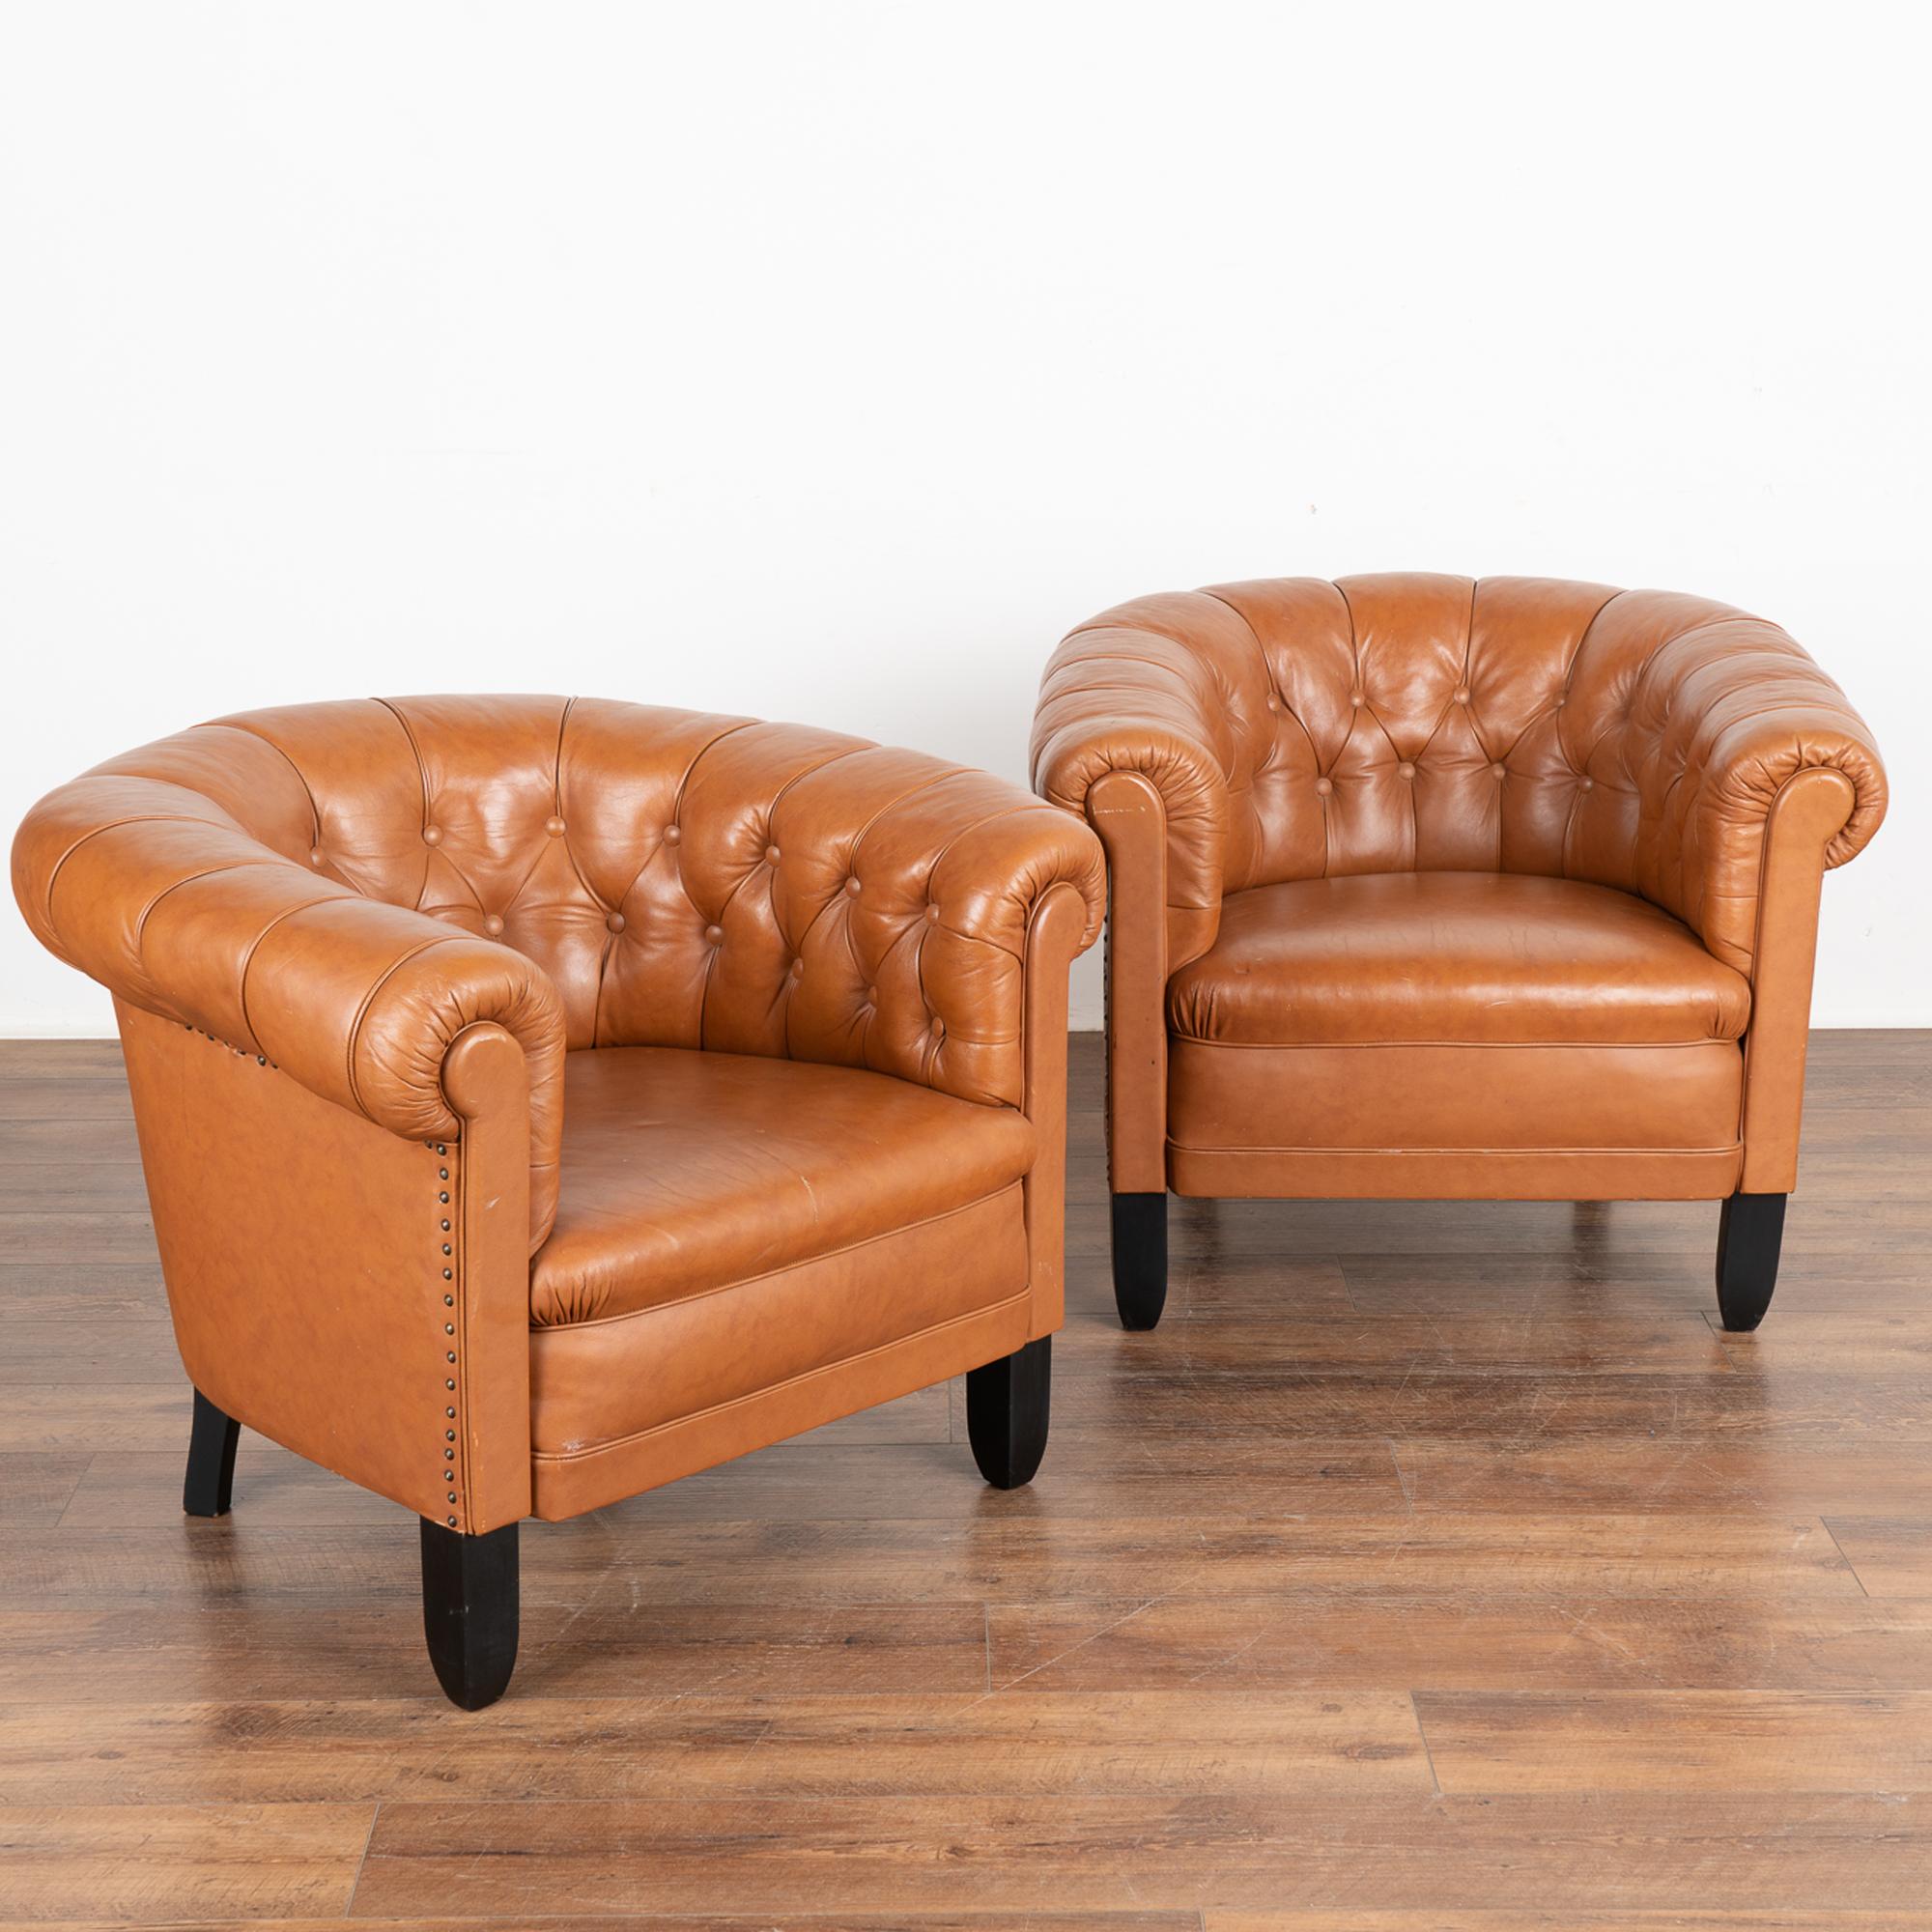 Pair, brown leather barrel back arm chairs with contrasting black hard wood legs.
Upholstered club chairs in button-tufted cognac leather, rolled arms and nailhead trim along sides.
Sits low; sold in original vintage condition. Typical age relatet